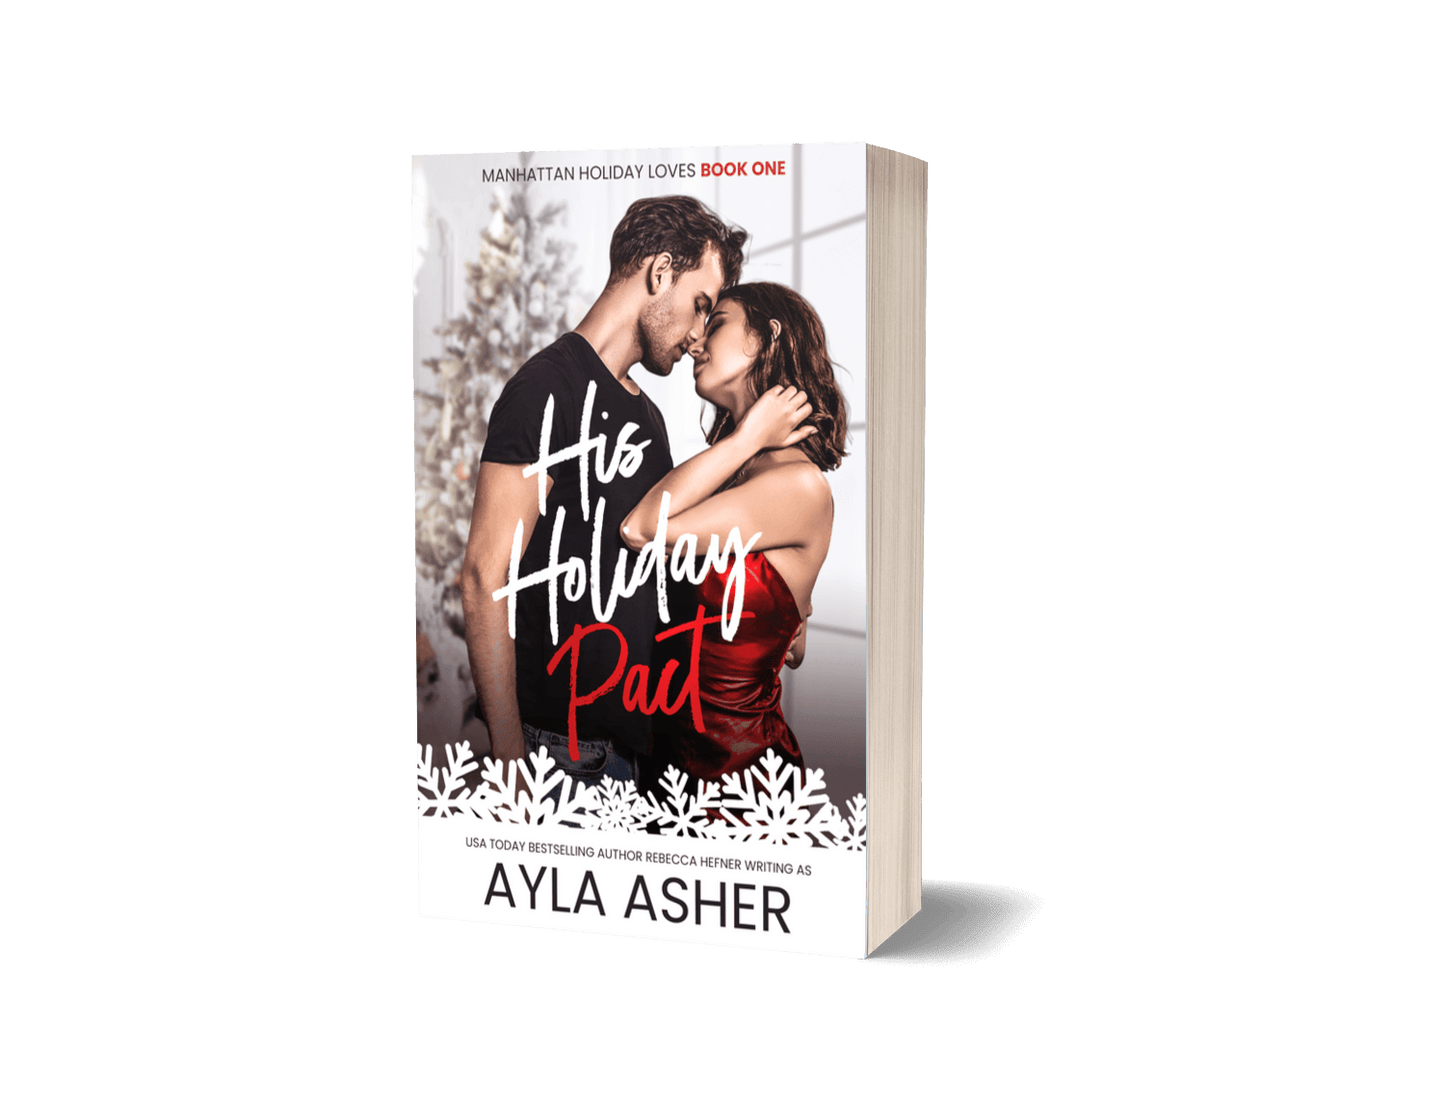 His Holiday Pact Signed Paperback (Manhattan Holiday Loves #1)